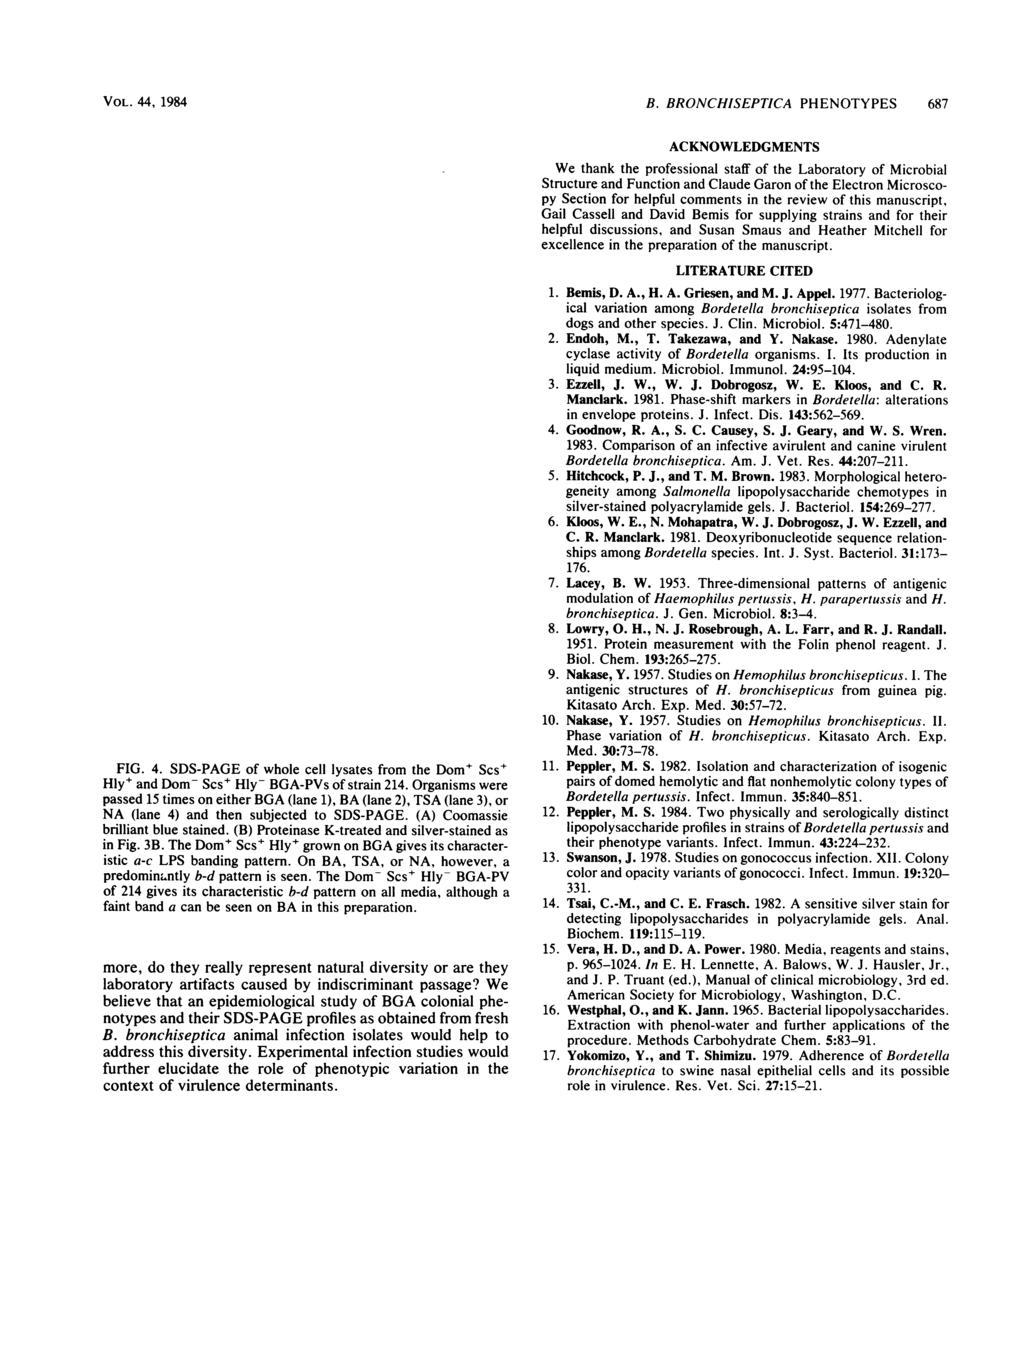 VOL. 44, 1984 d- [ A. Coomassie-stained Dorn Scs+Hly+ Dom Scs+Hly 1 2 3 4 1 2 3 4 _ I- -4 ---_--V B. silver-stained a- b FIG. 4. SDS-PAGE of whole cell lysates from the Dom' Scs+ Hly+ and Dom- Scs+ Hly- BGA-PVs of strain 214.